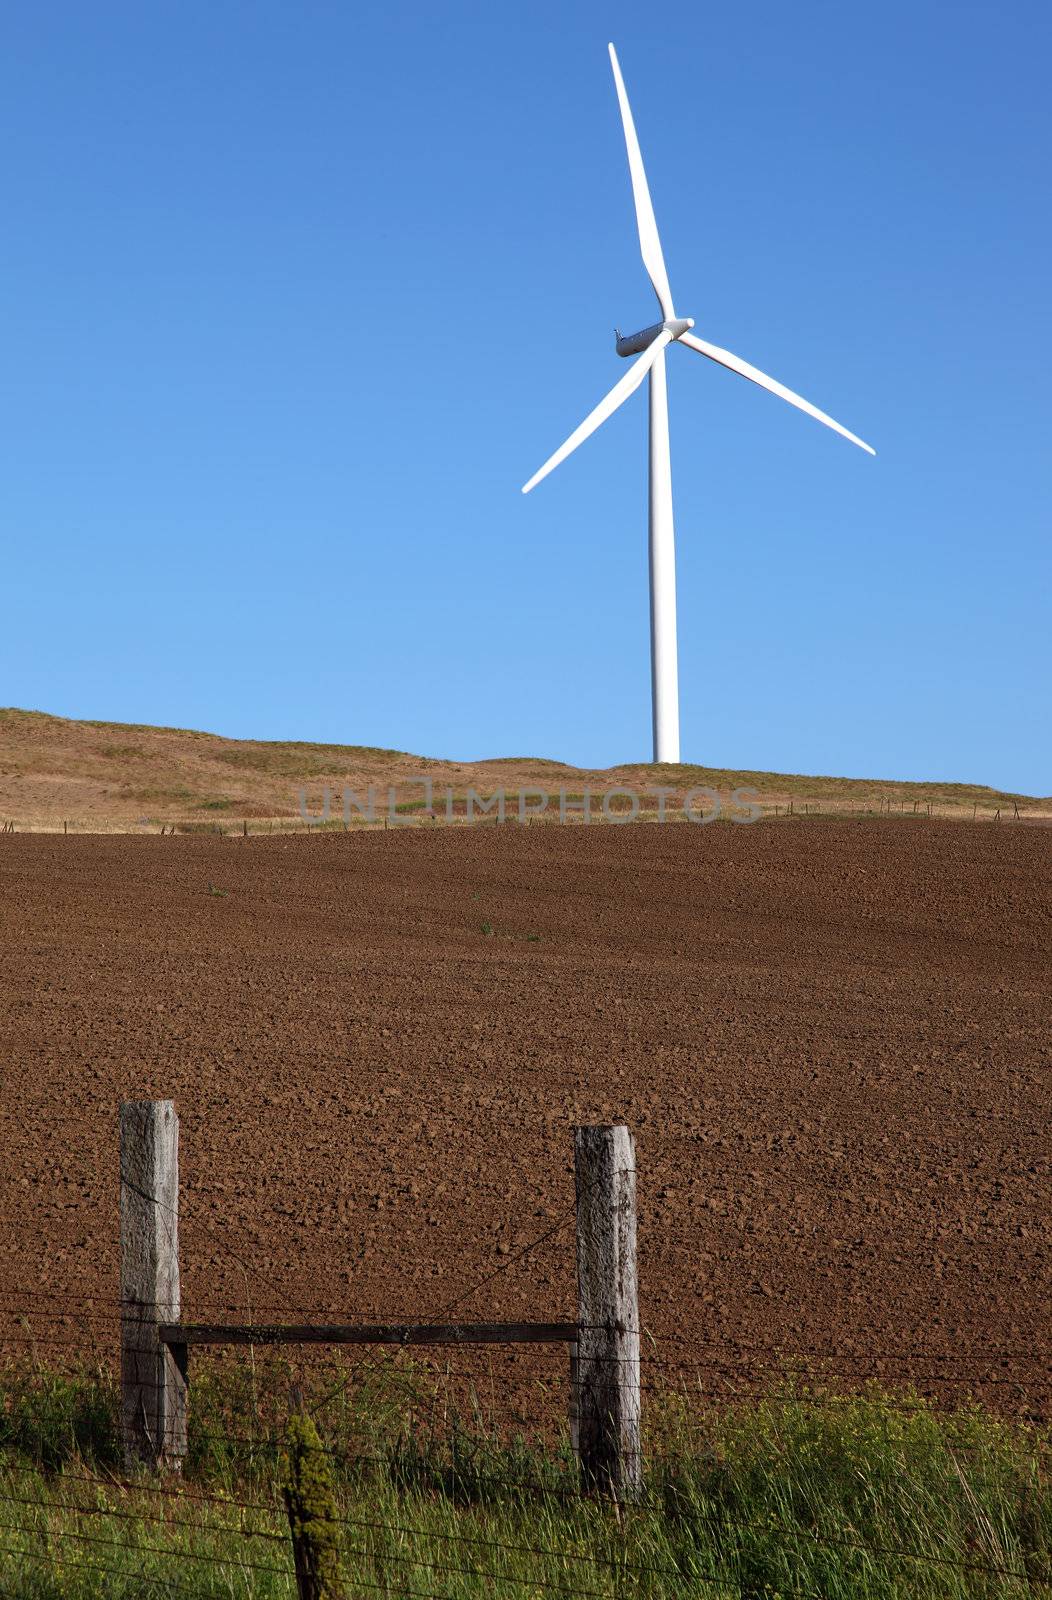 Wind turbines on a hill in rural Washington state.